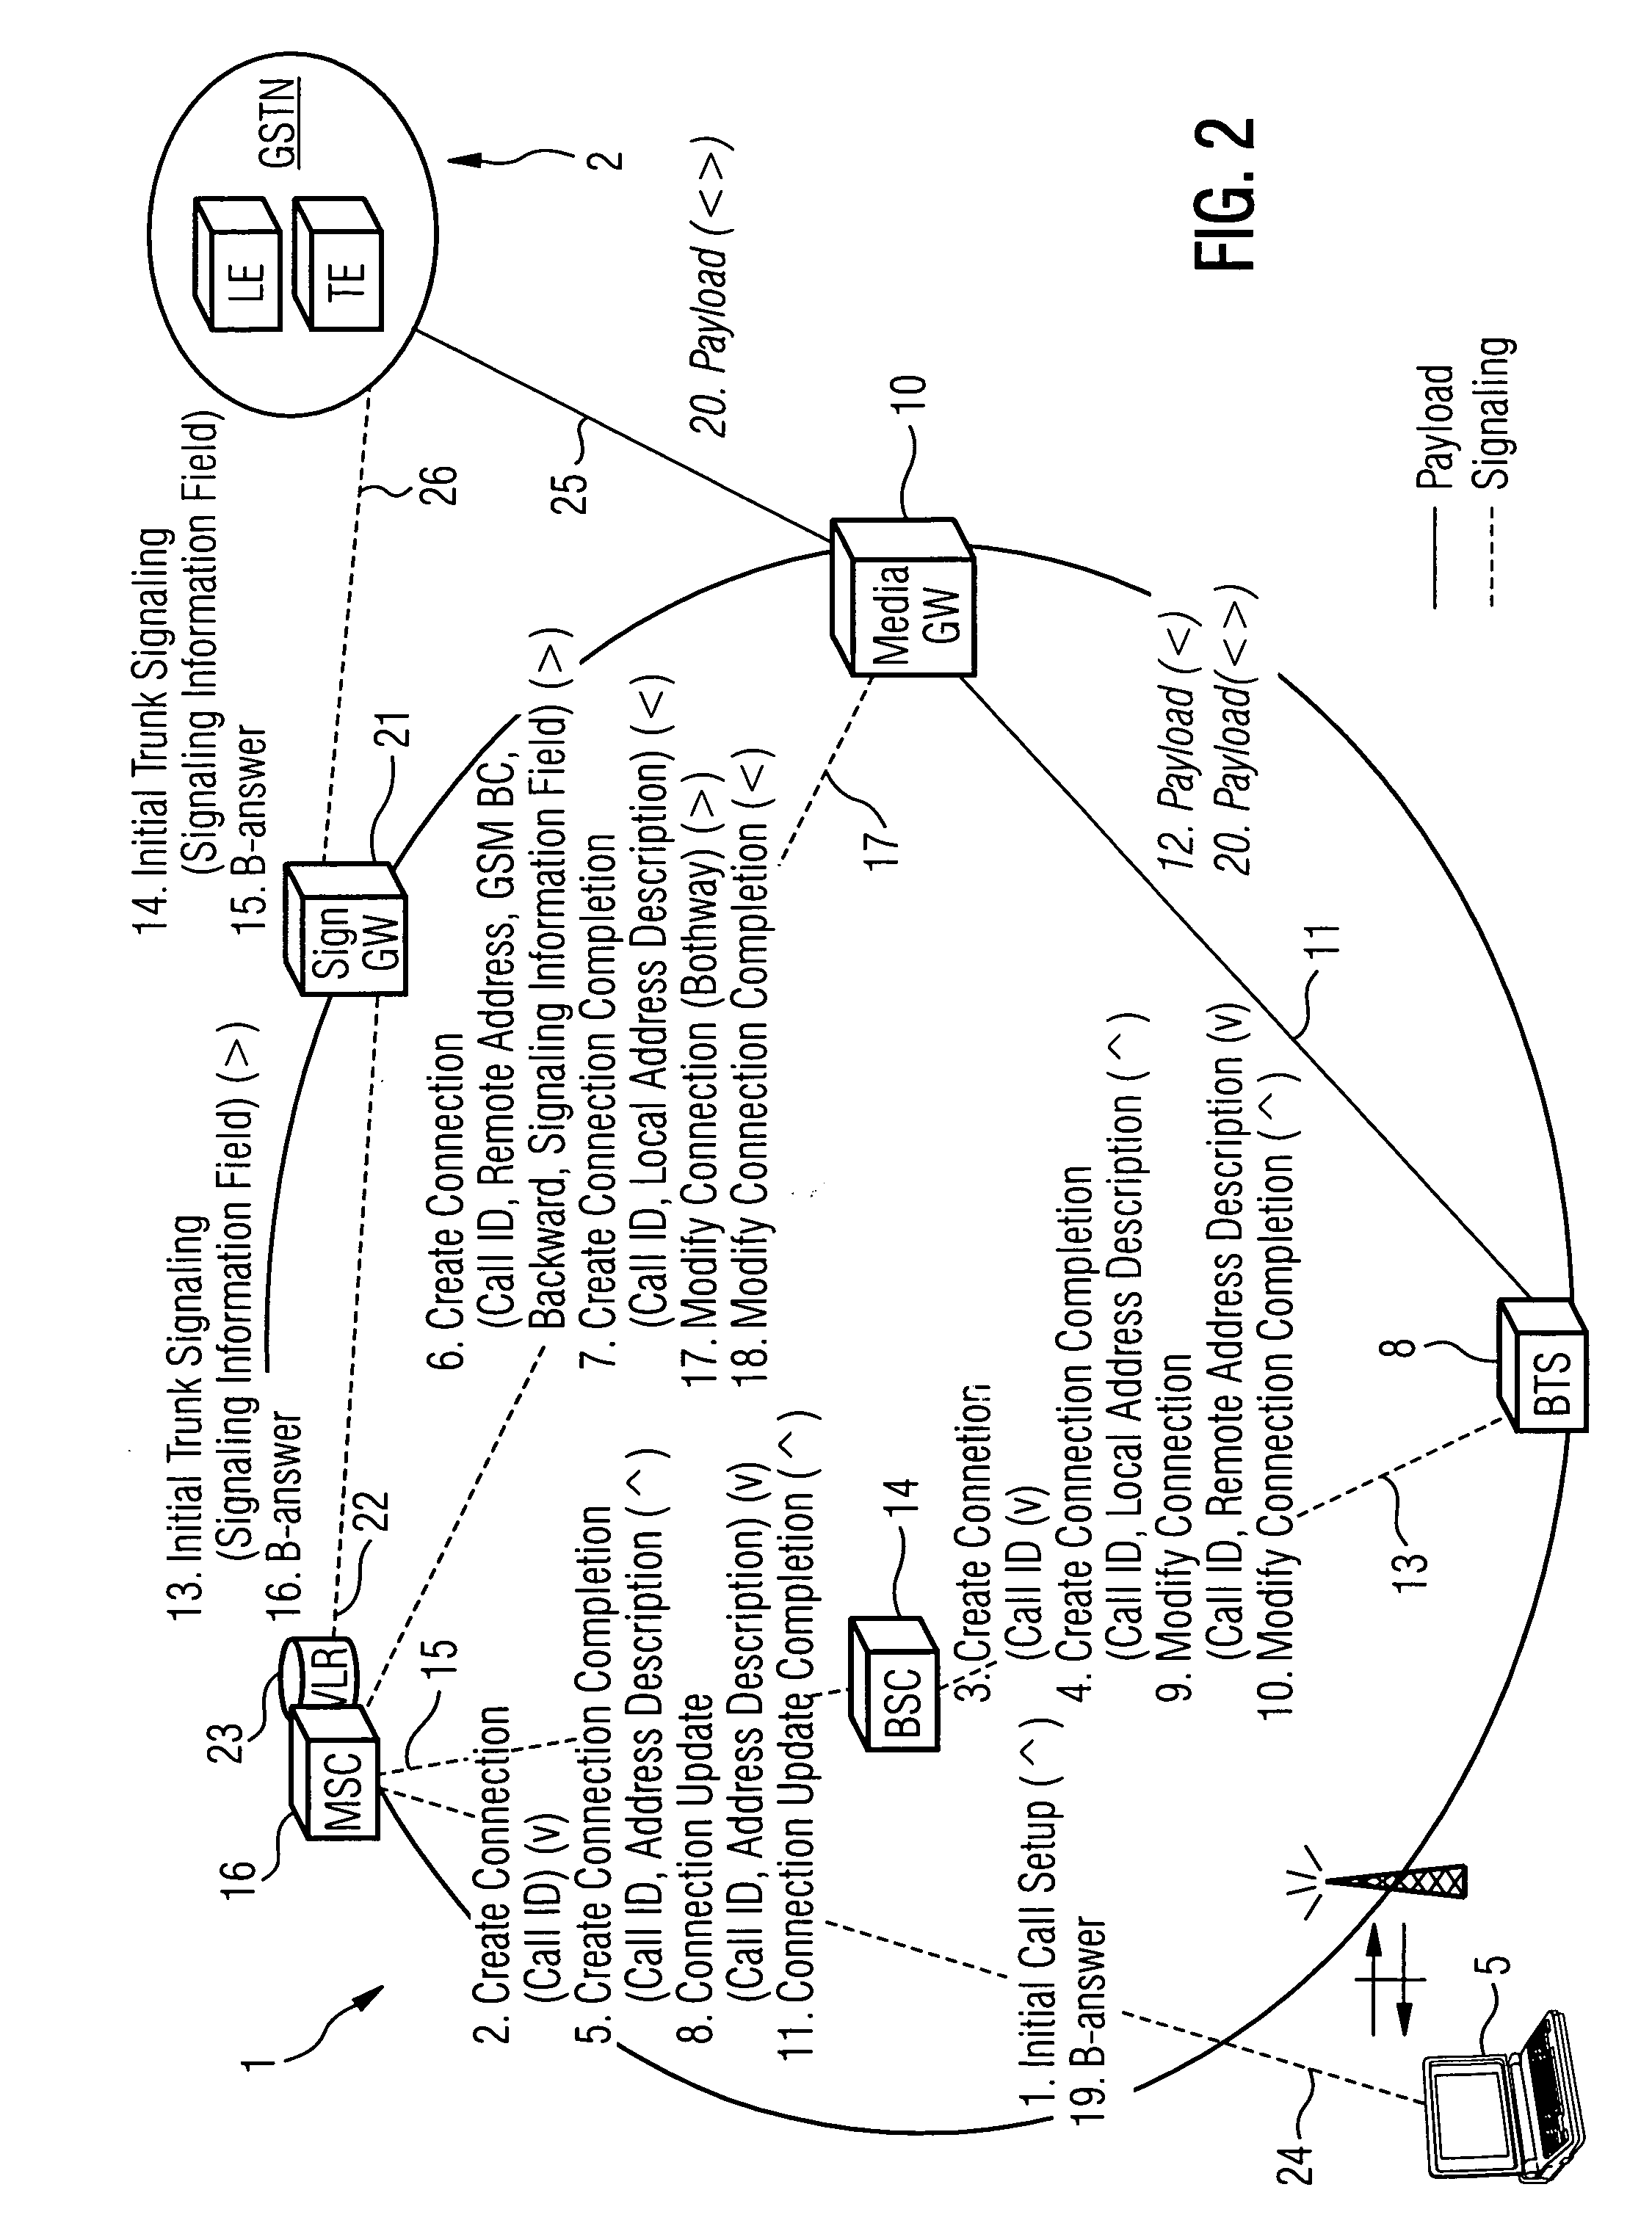 Basic architecture for packet switched protocol based GSM networks